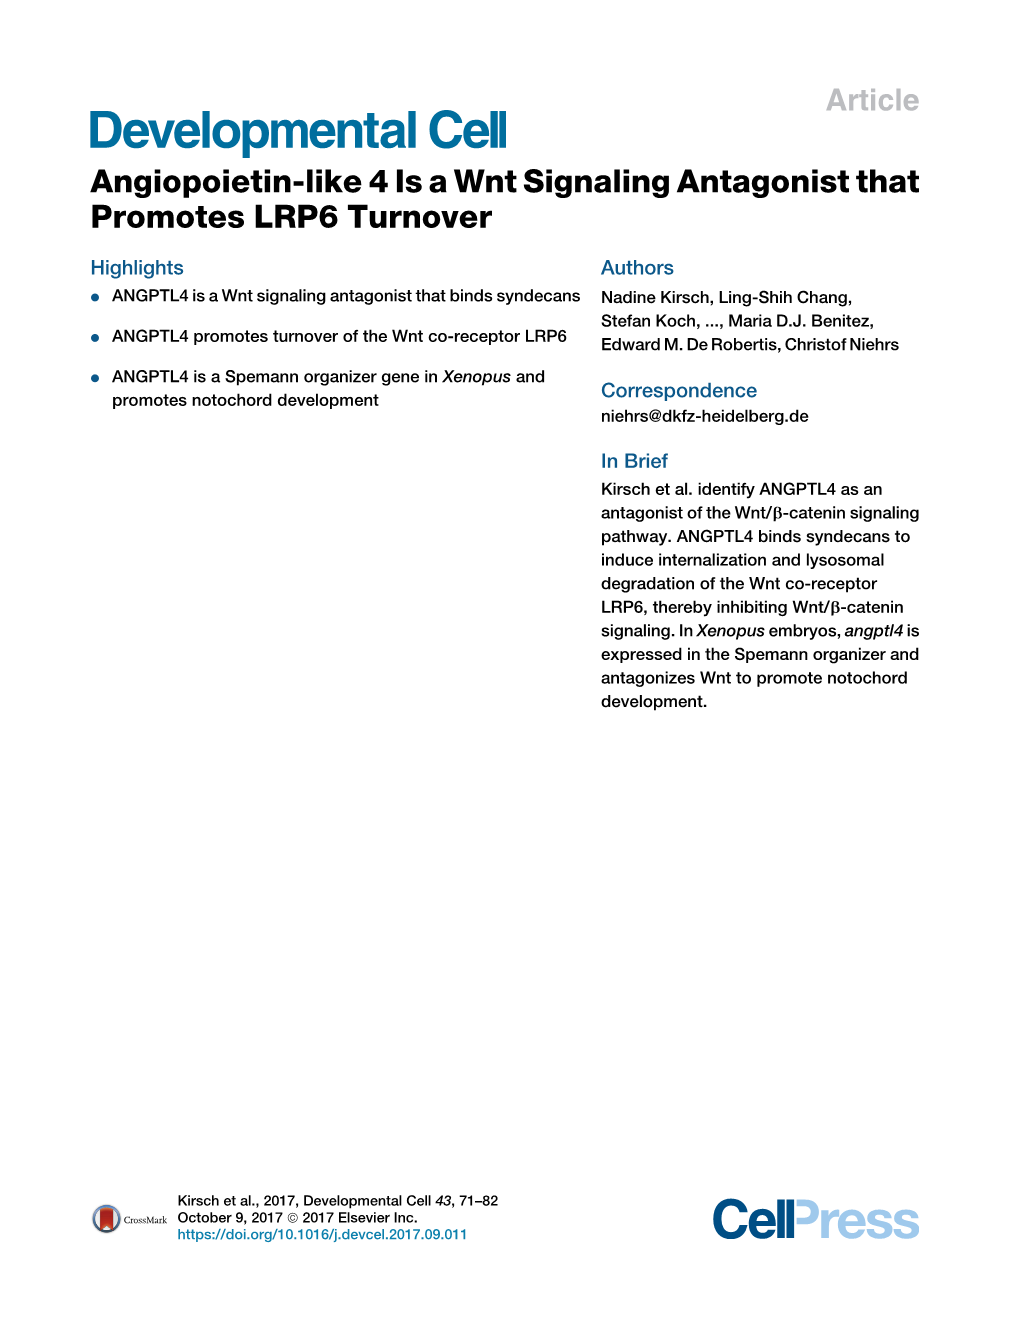 Angiopoietin-Like 4 Is a Wnt Signaling Antagonist That Promotes LRP6 Turnover